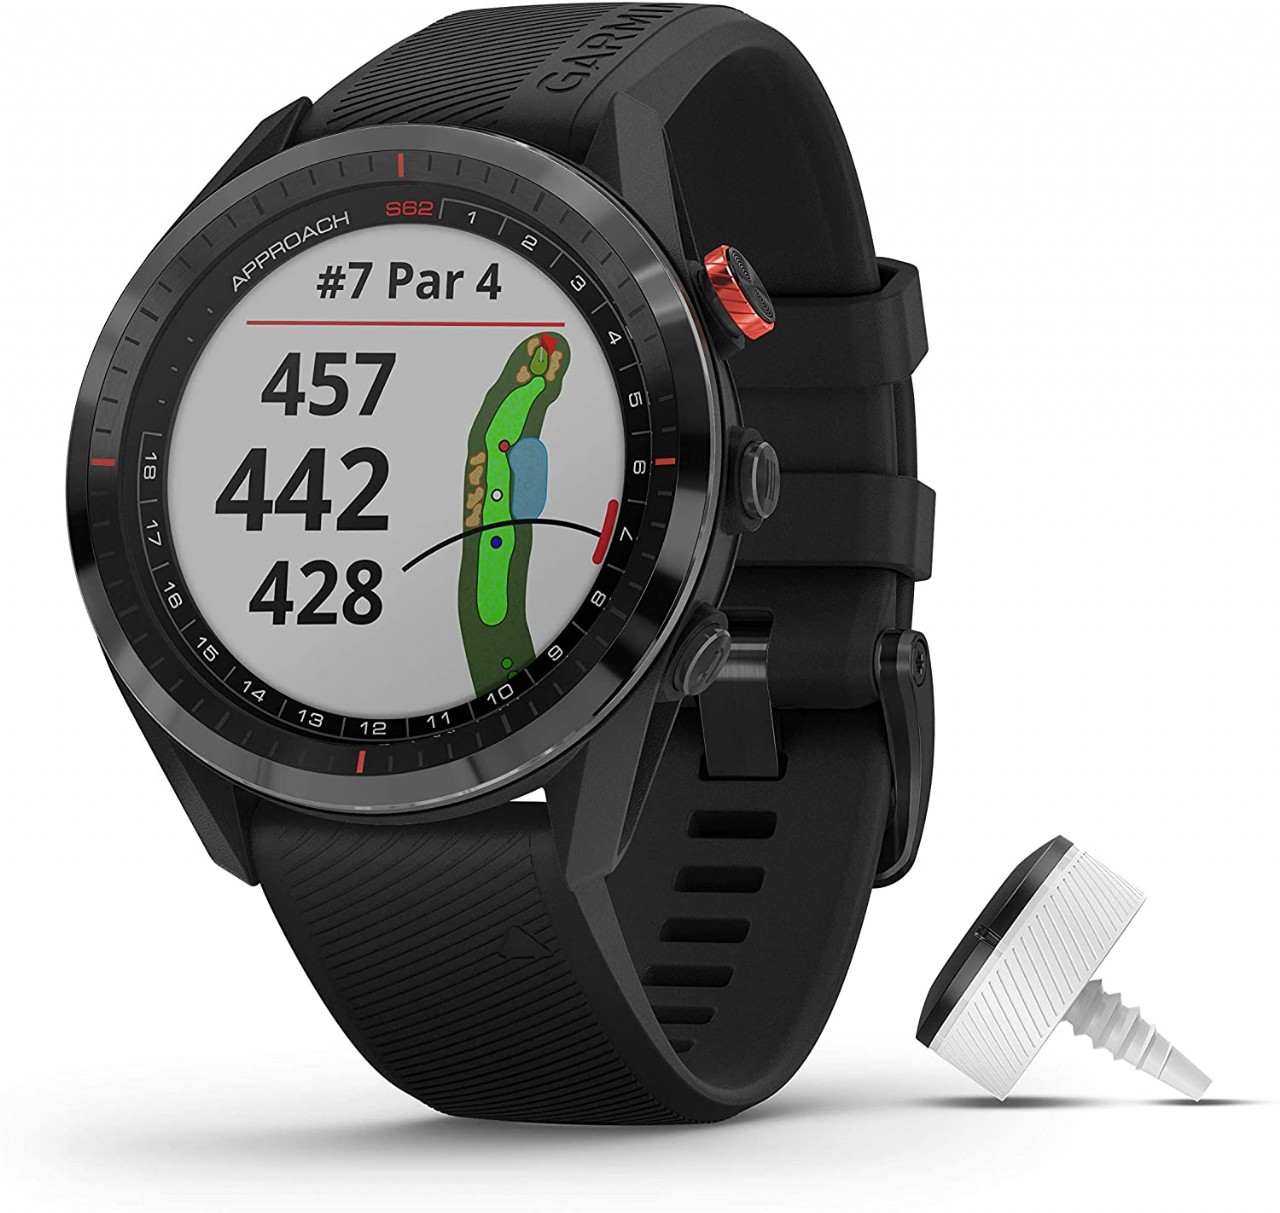 Garmin Approach S62 Bundle, Premium Golf GPS Watch with 3 CT10 Club Tracking Sensors, Built-in